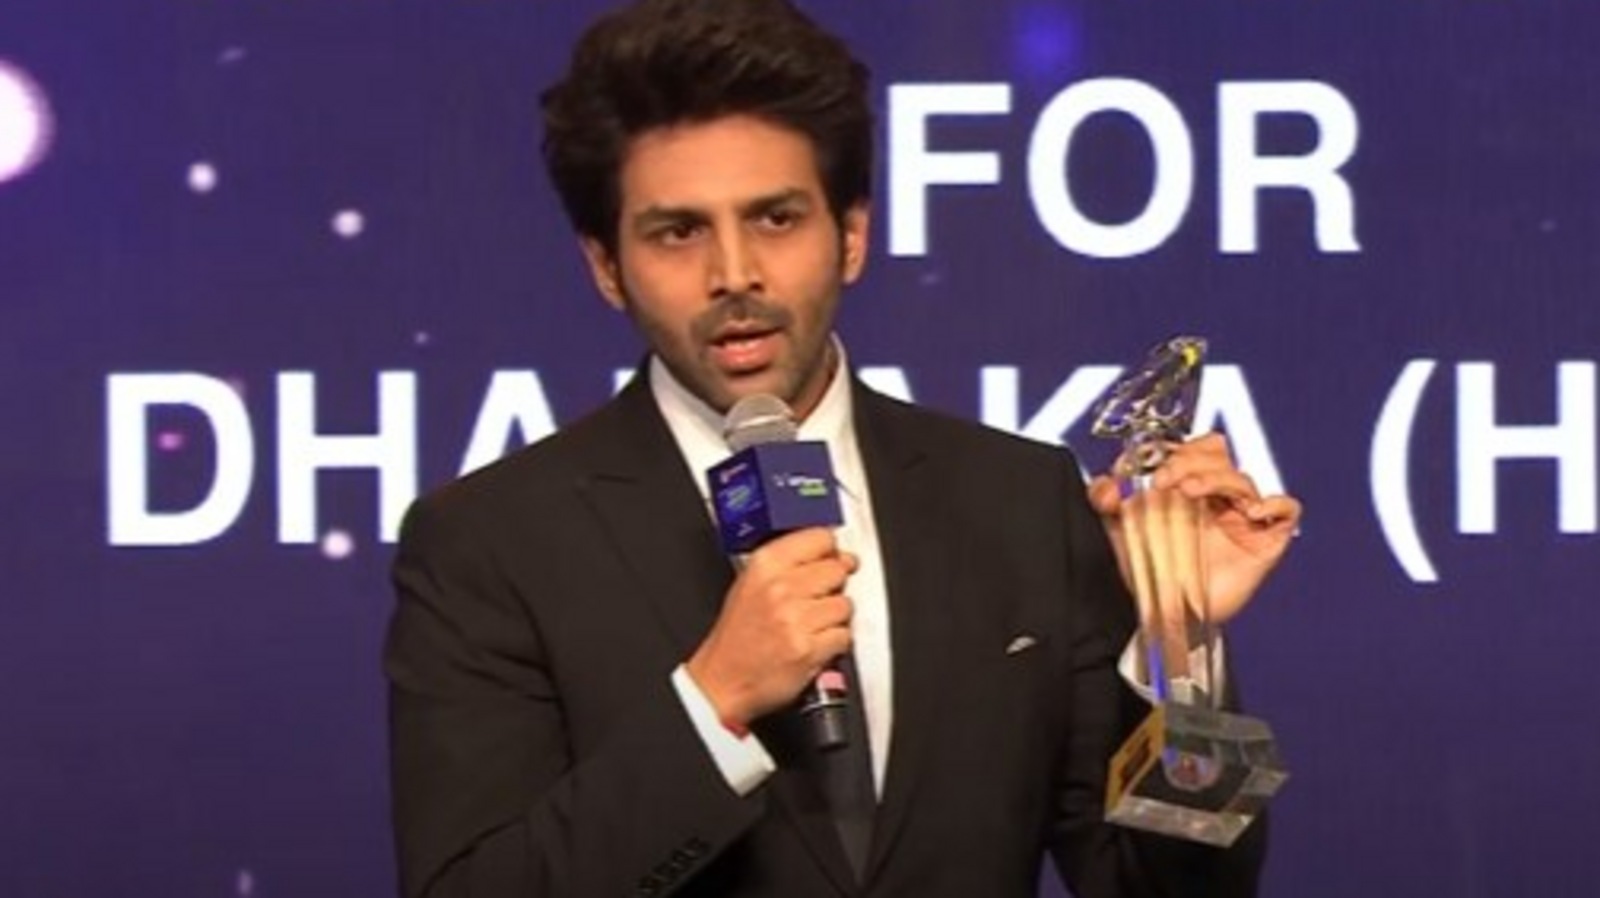 From Kartik Aaryan to Taapsee Pannu: Winners in the film category at OTTplay Awards 2022. See pics